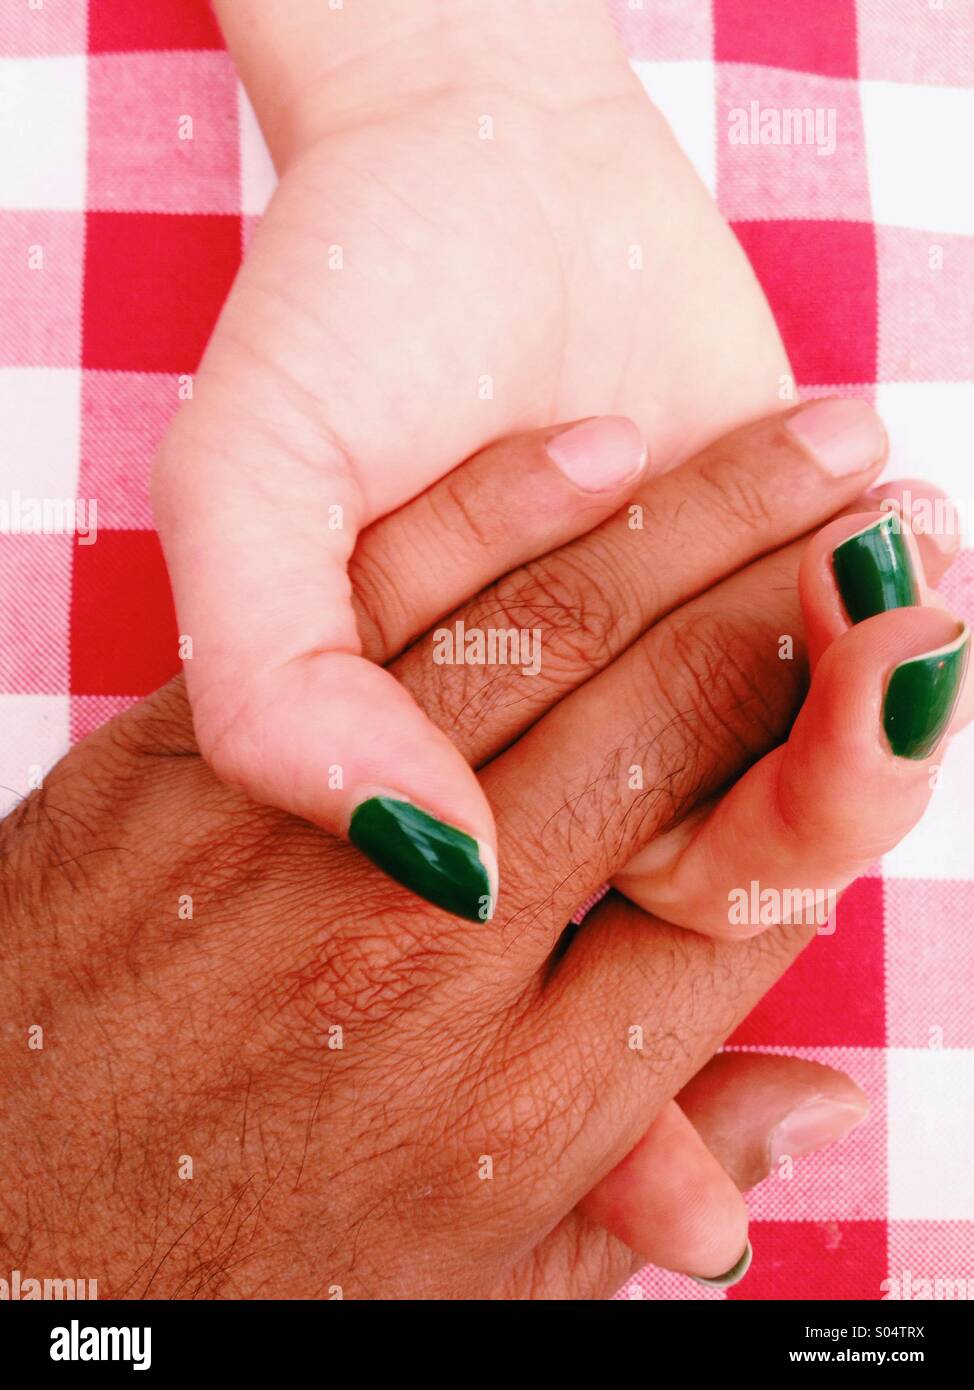 Close-up image of interracial couple holding hands Stock Photo